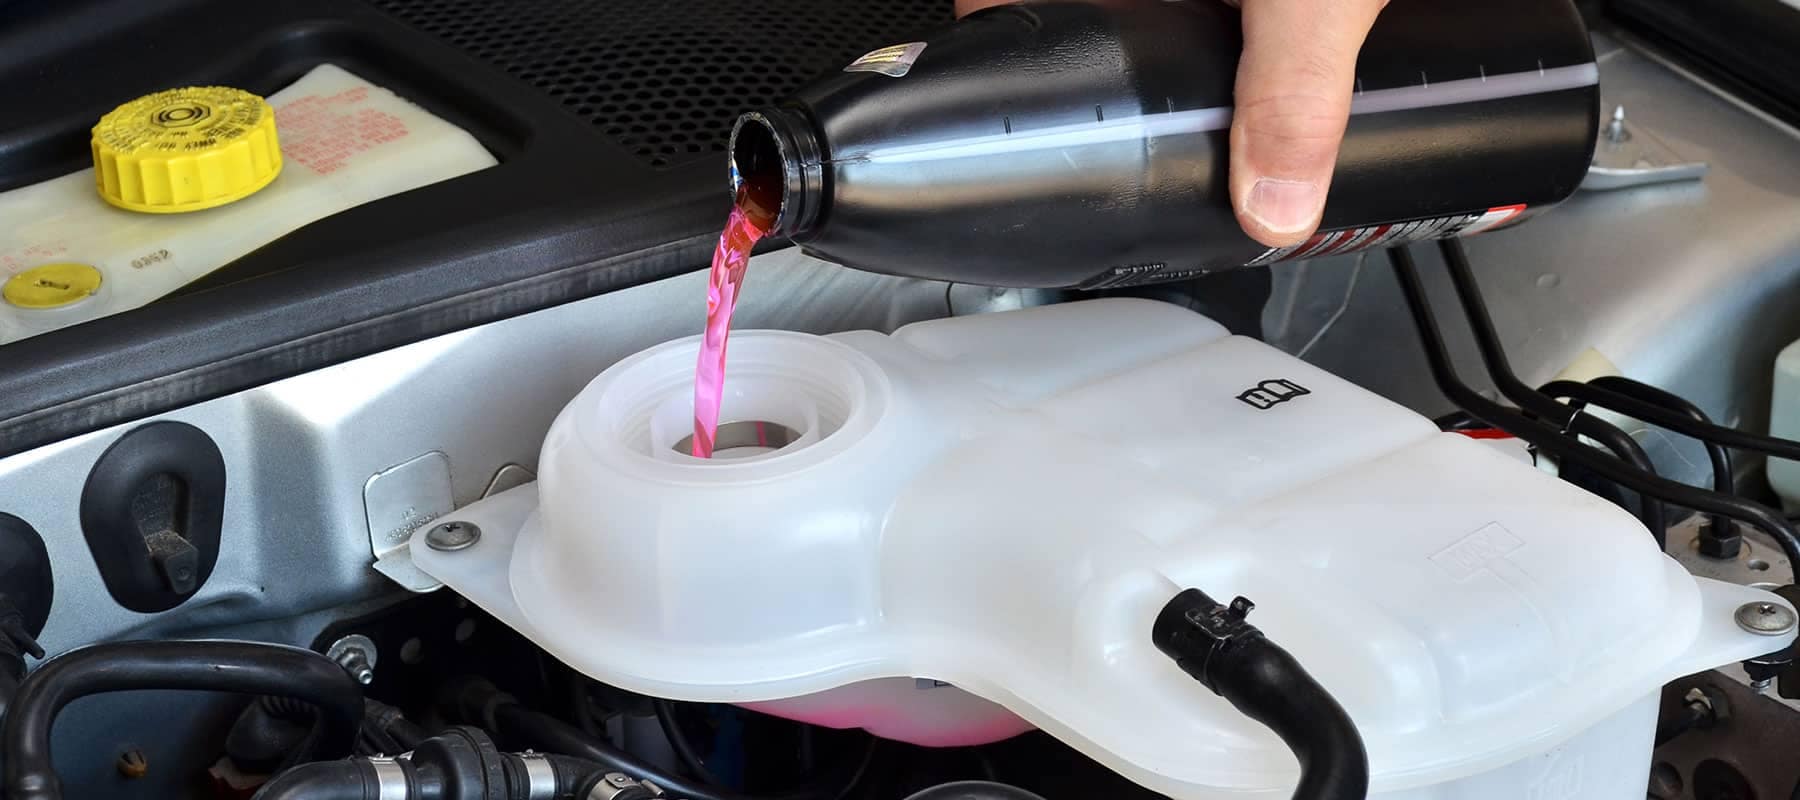 Coolant picture of technician pouring pink coolant into engine reservoir